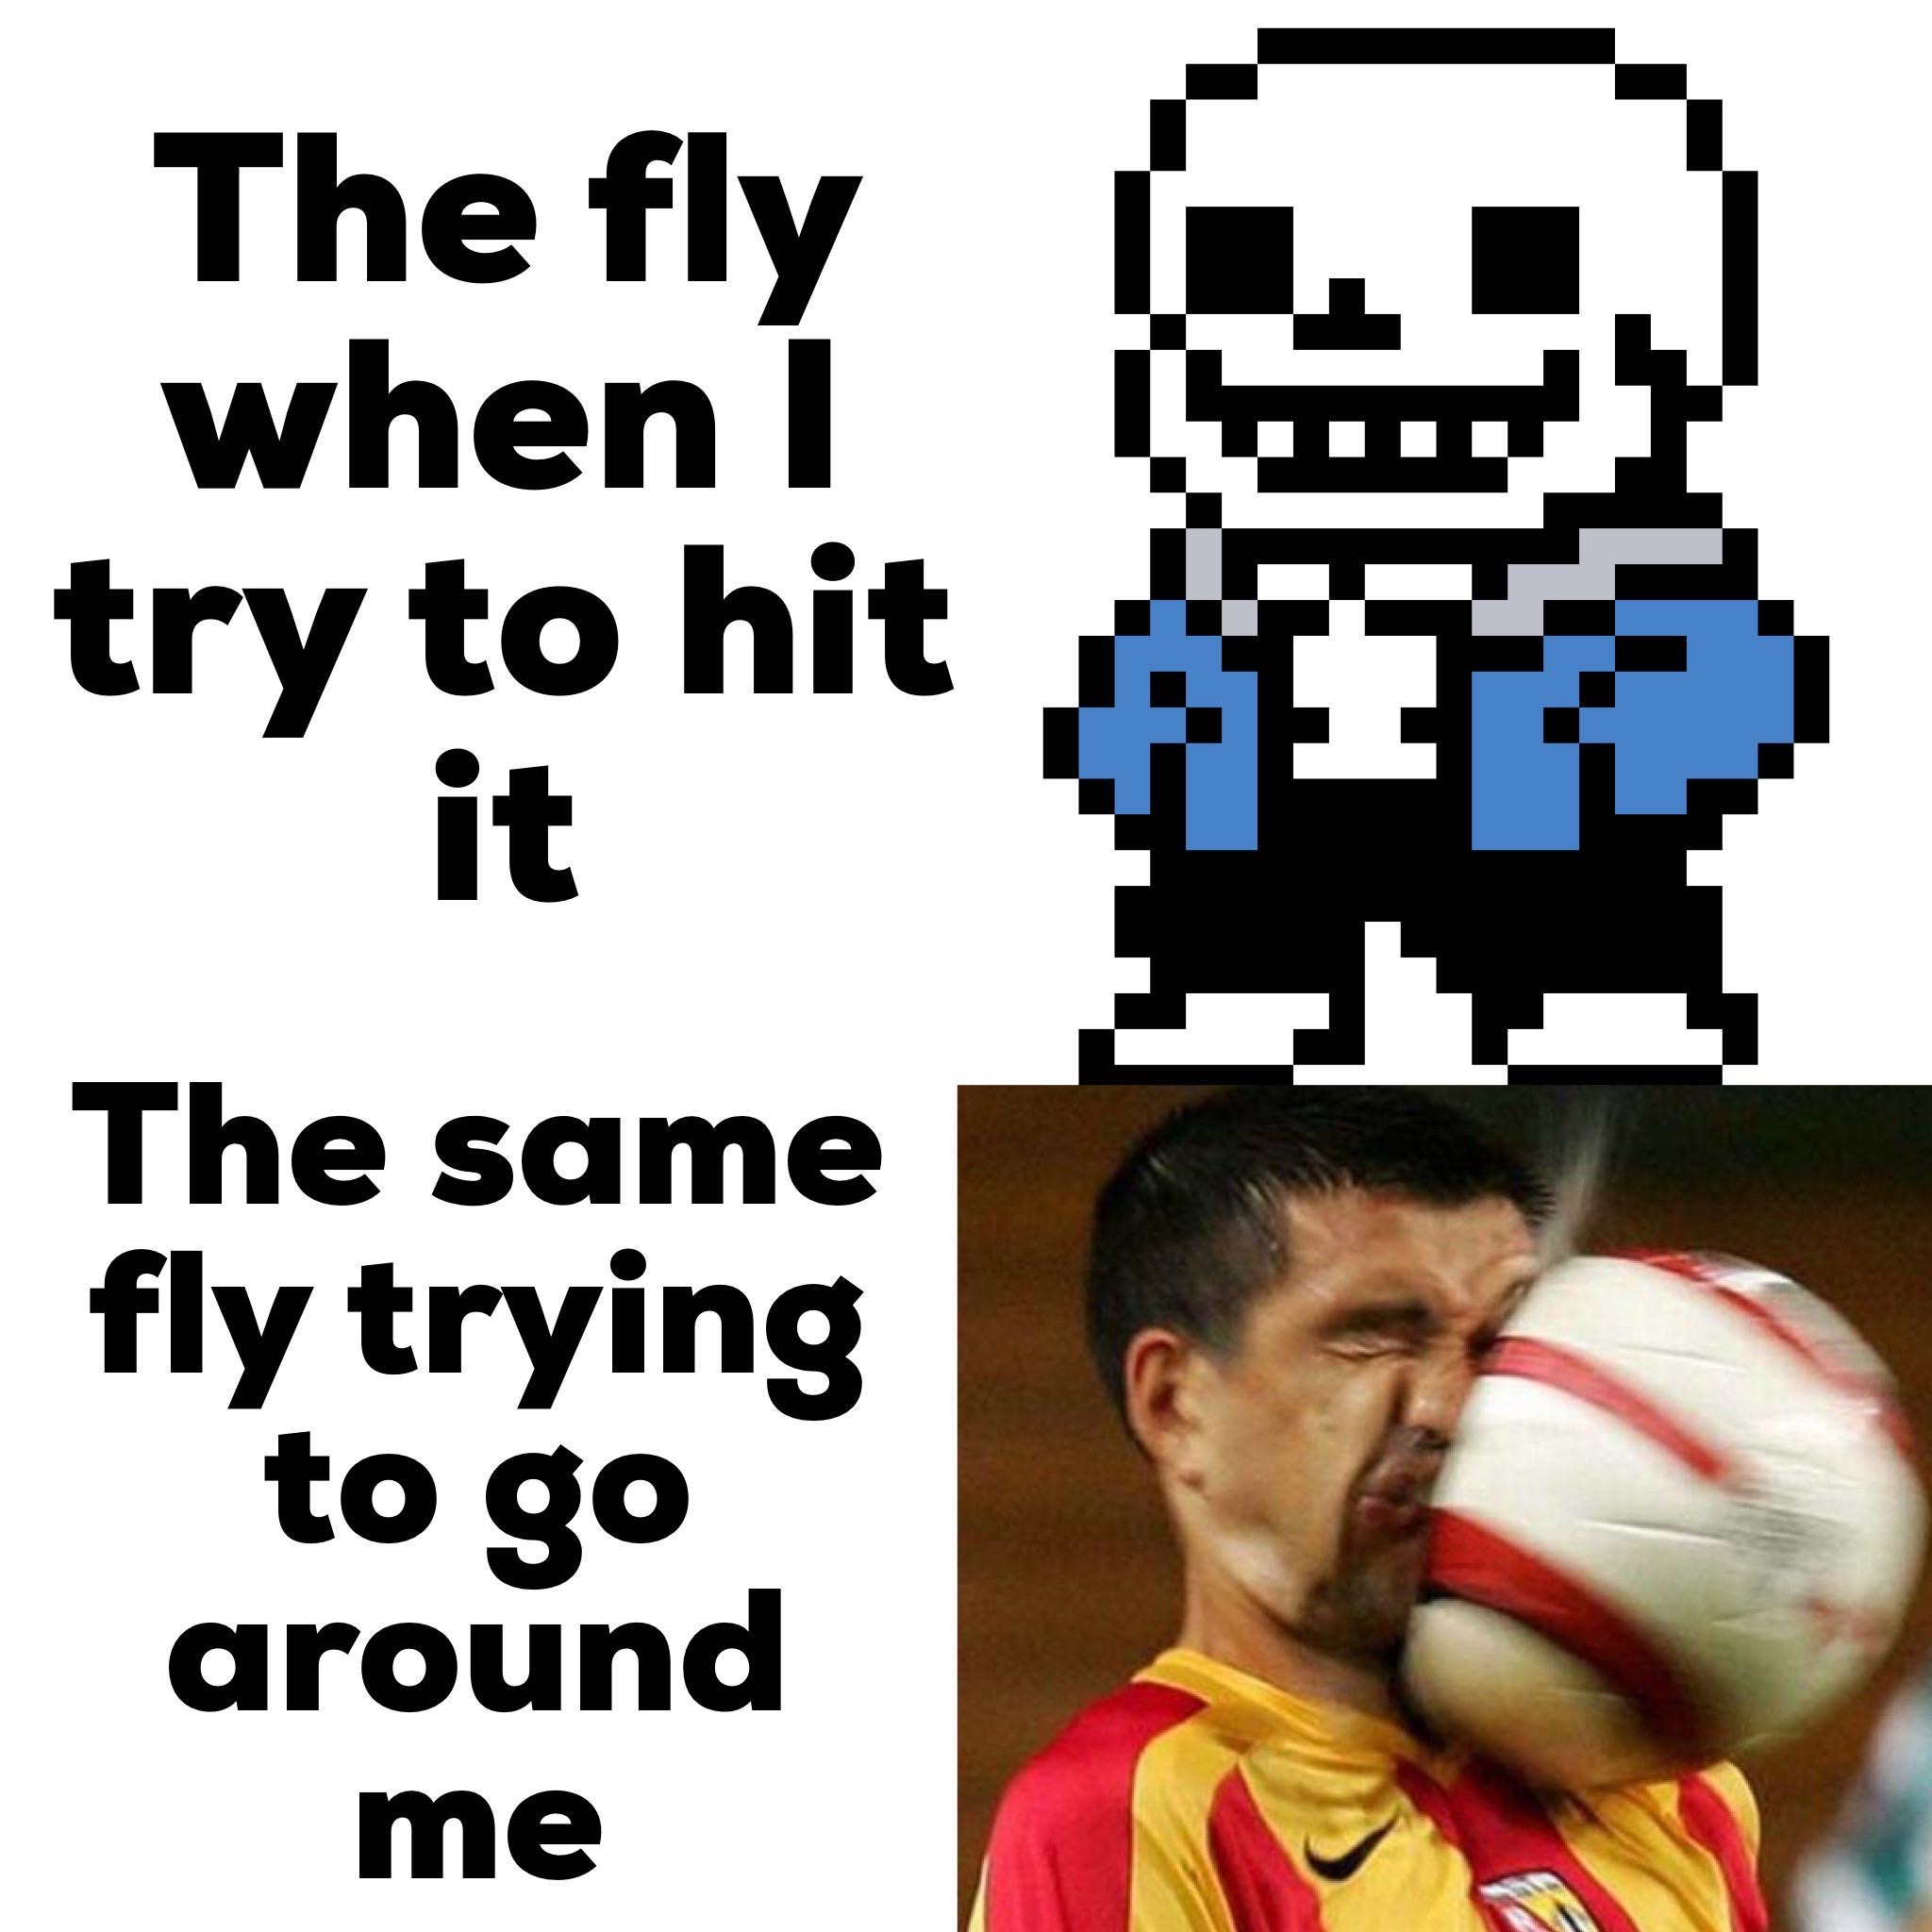 dank memes funny soccer - The fly when try to hit it The same fly trying to go around me